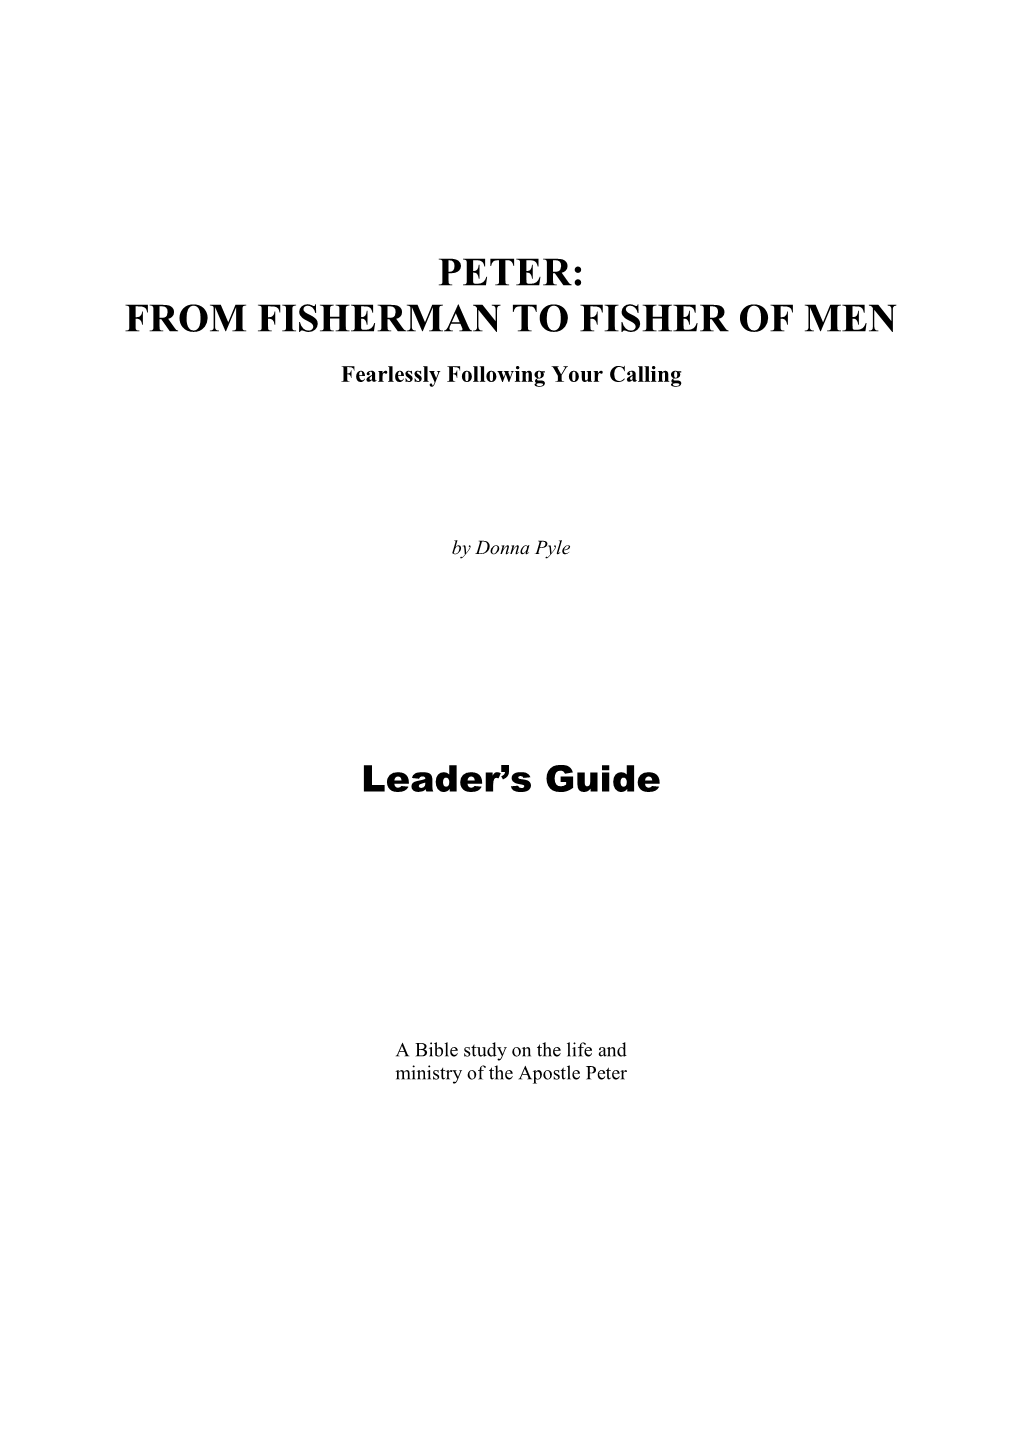 Peter: from Fisherman to Fisher of Men — Leader Guide